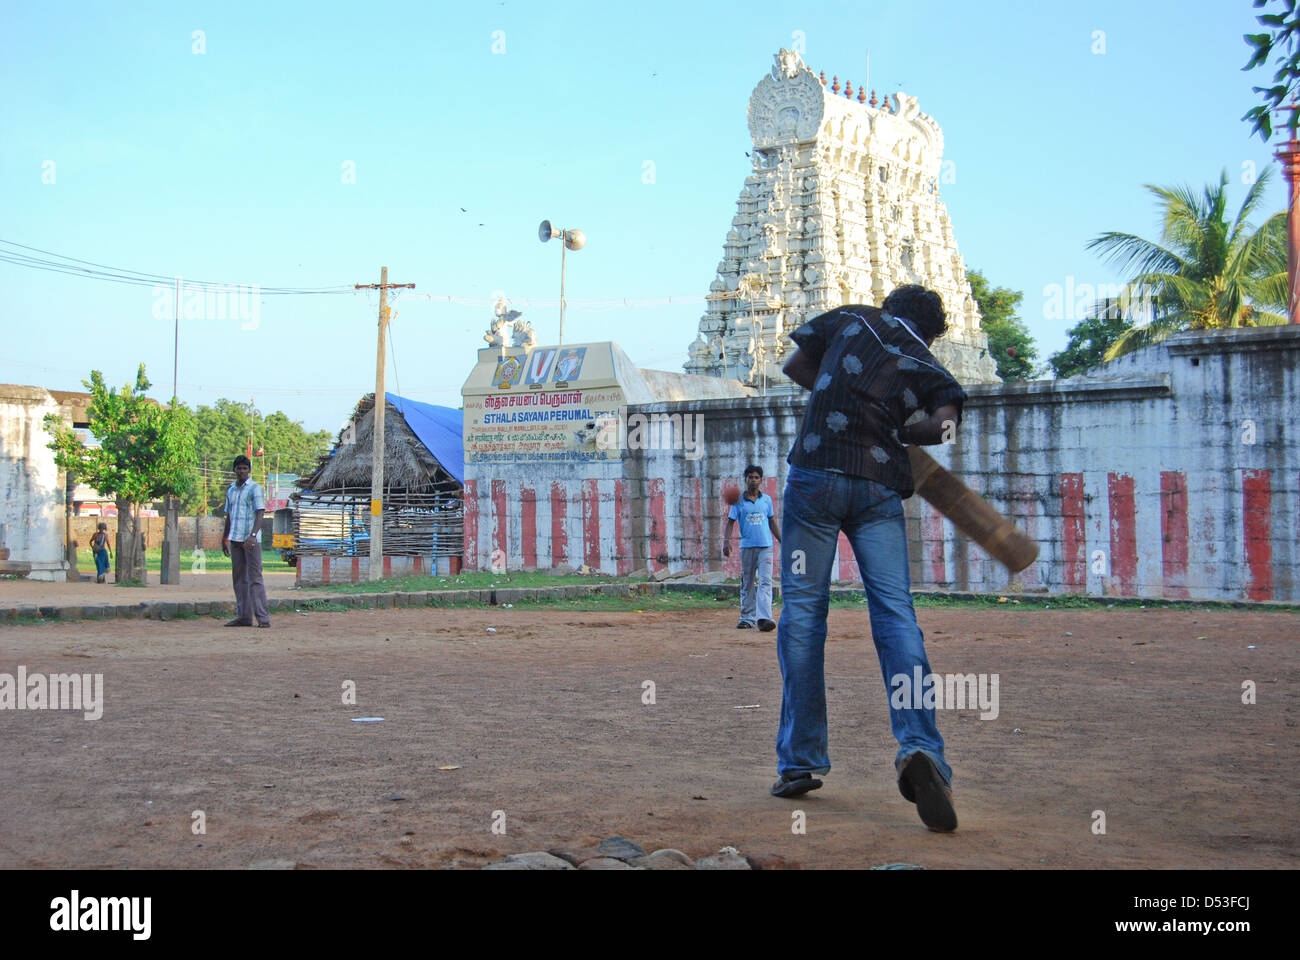 Children Playing Cricket in front of a temple, Mamallapuram, Tamil Nadu, India. Stock Photo